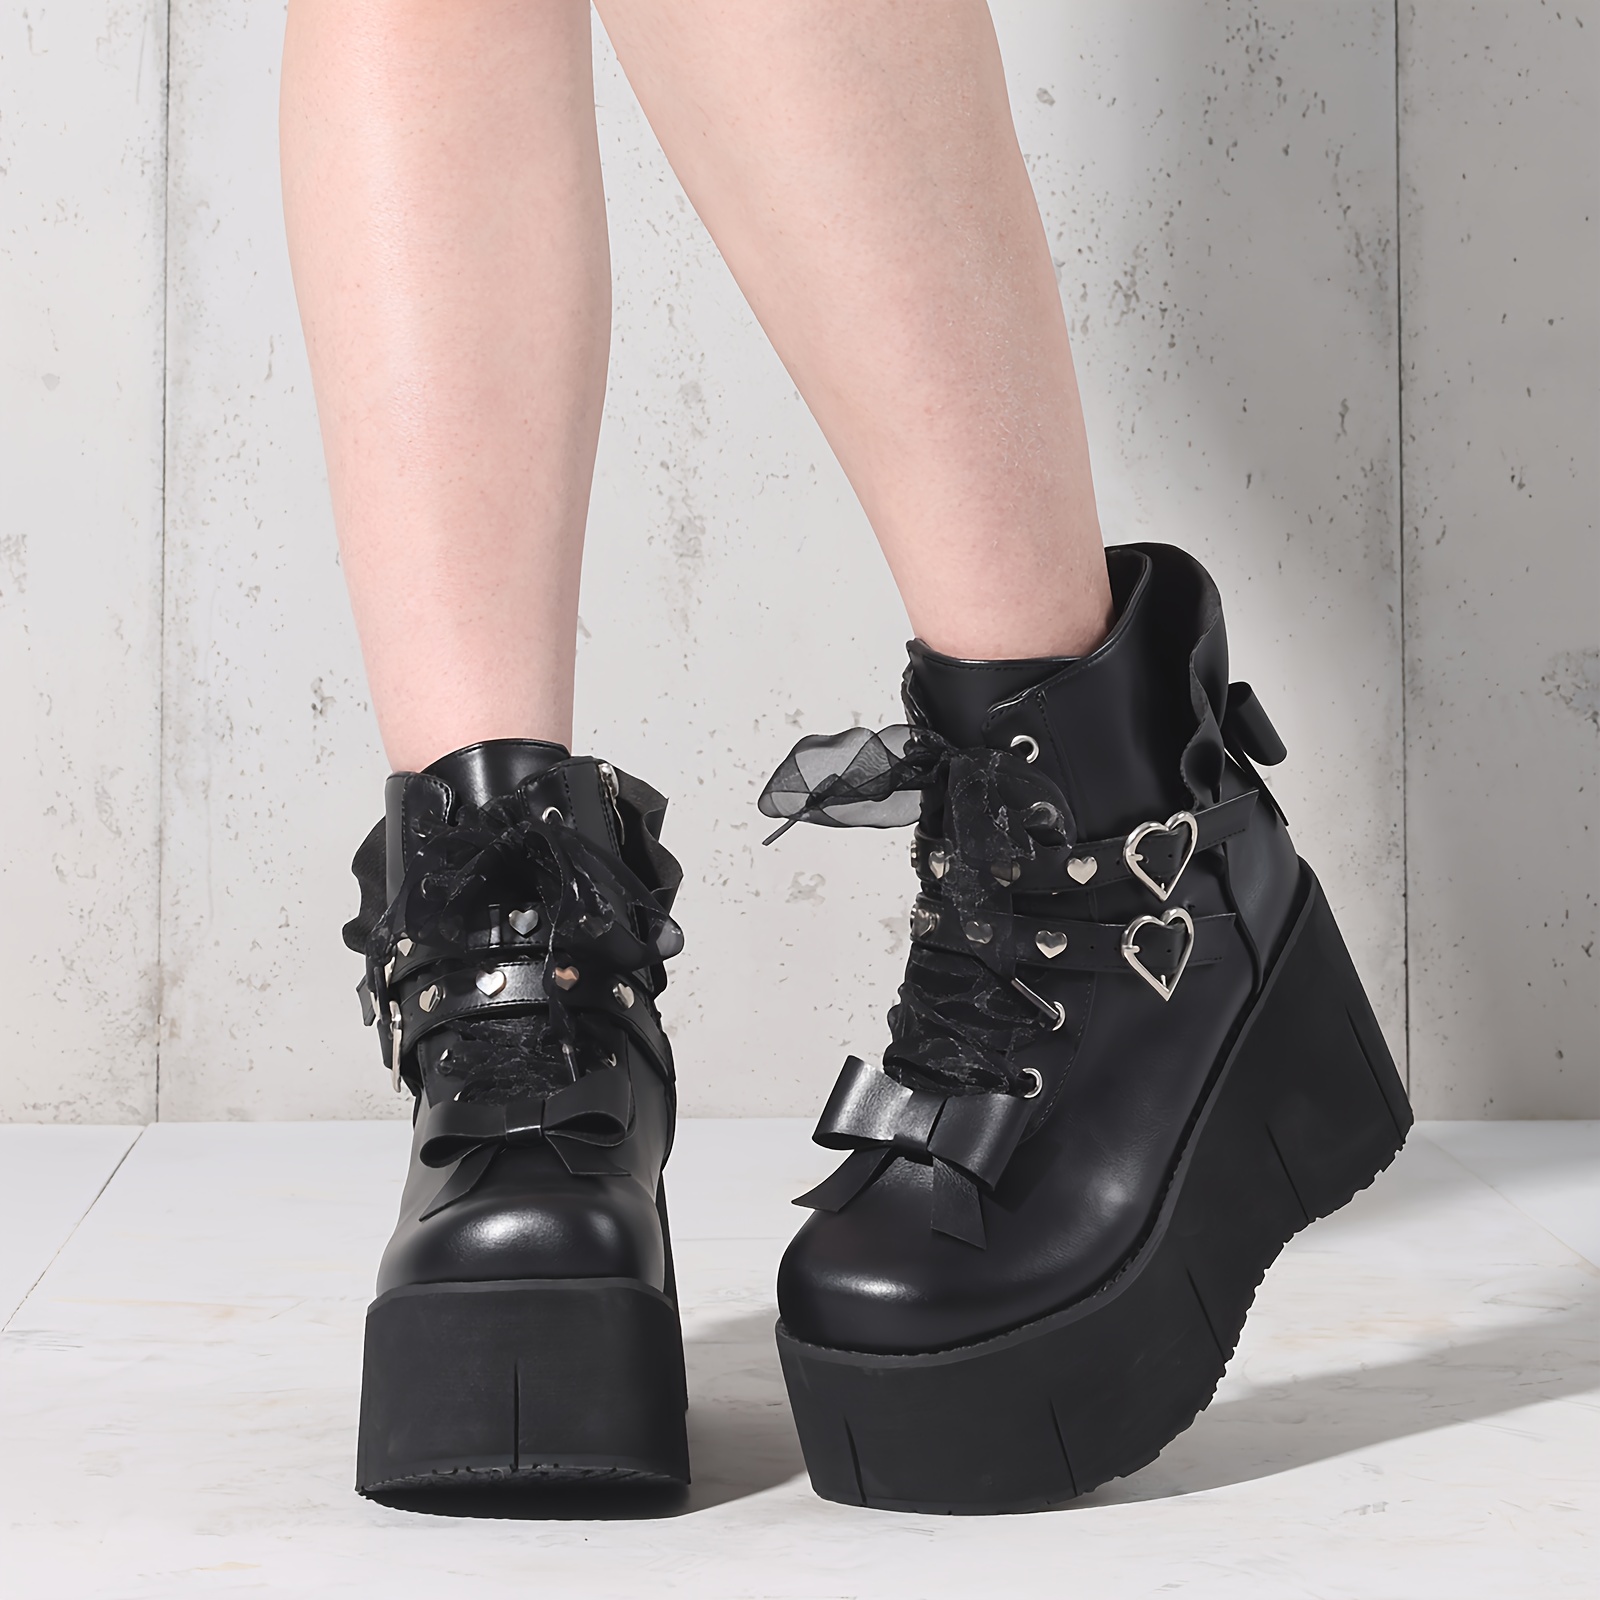 

Women's Punk Style Wedge Ankle Boots, Goth-inspired Platform , Heart Buckle Zipper Closure Motorcycle Boots